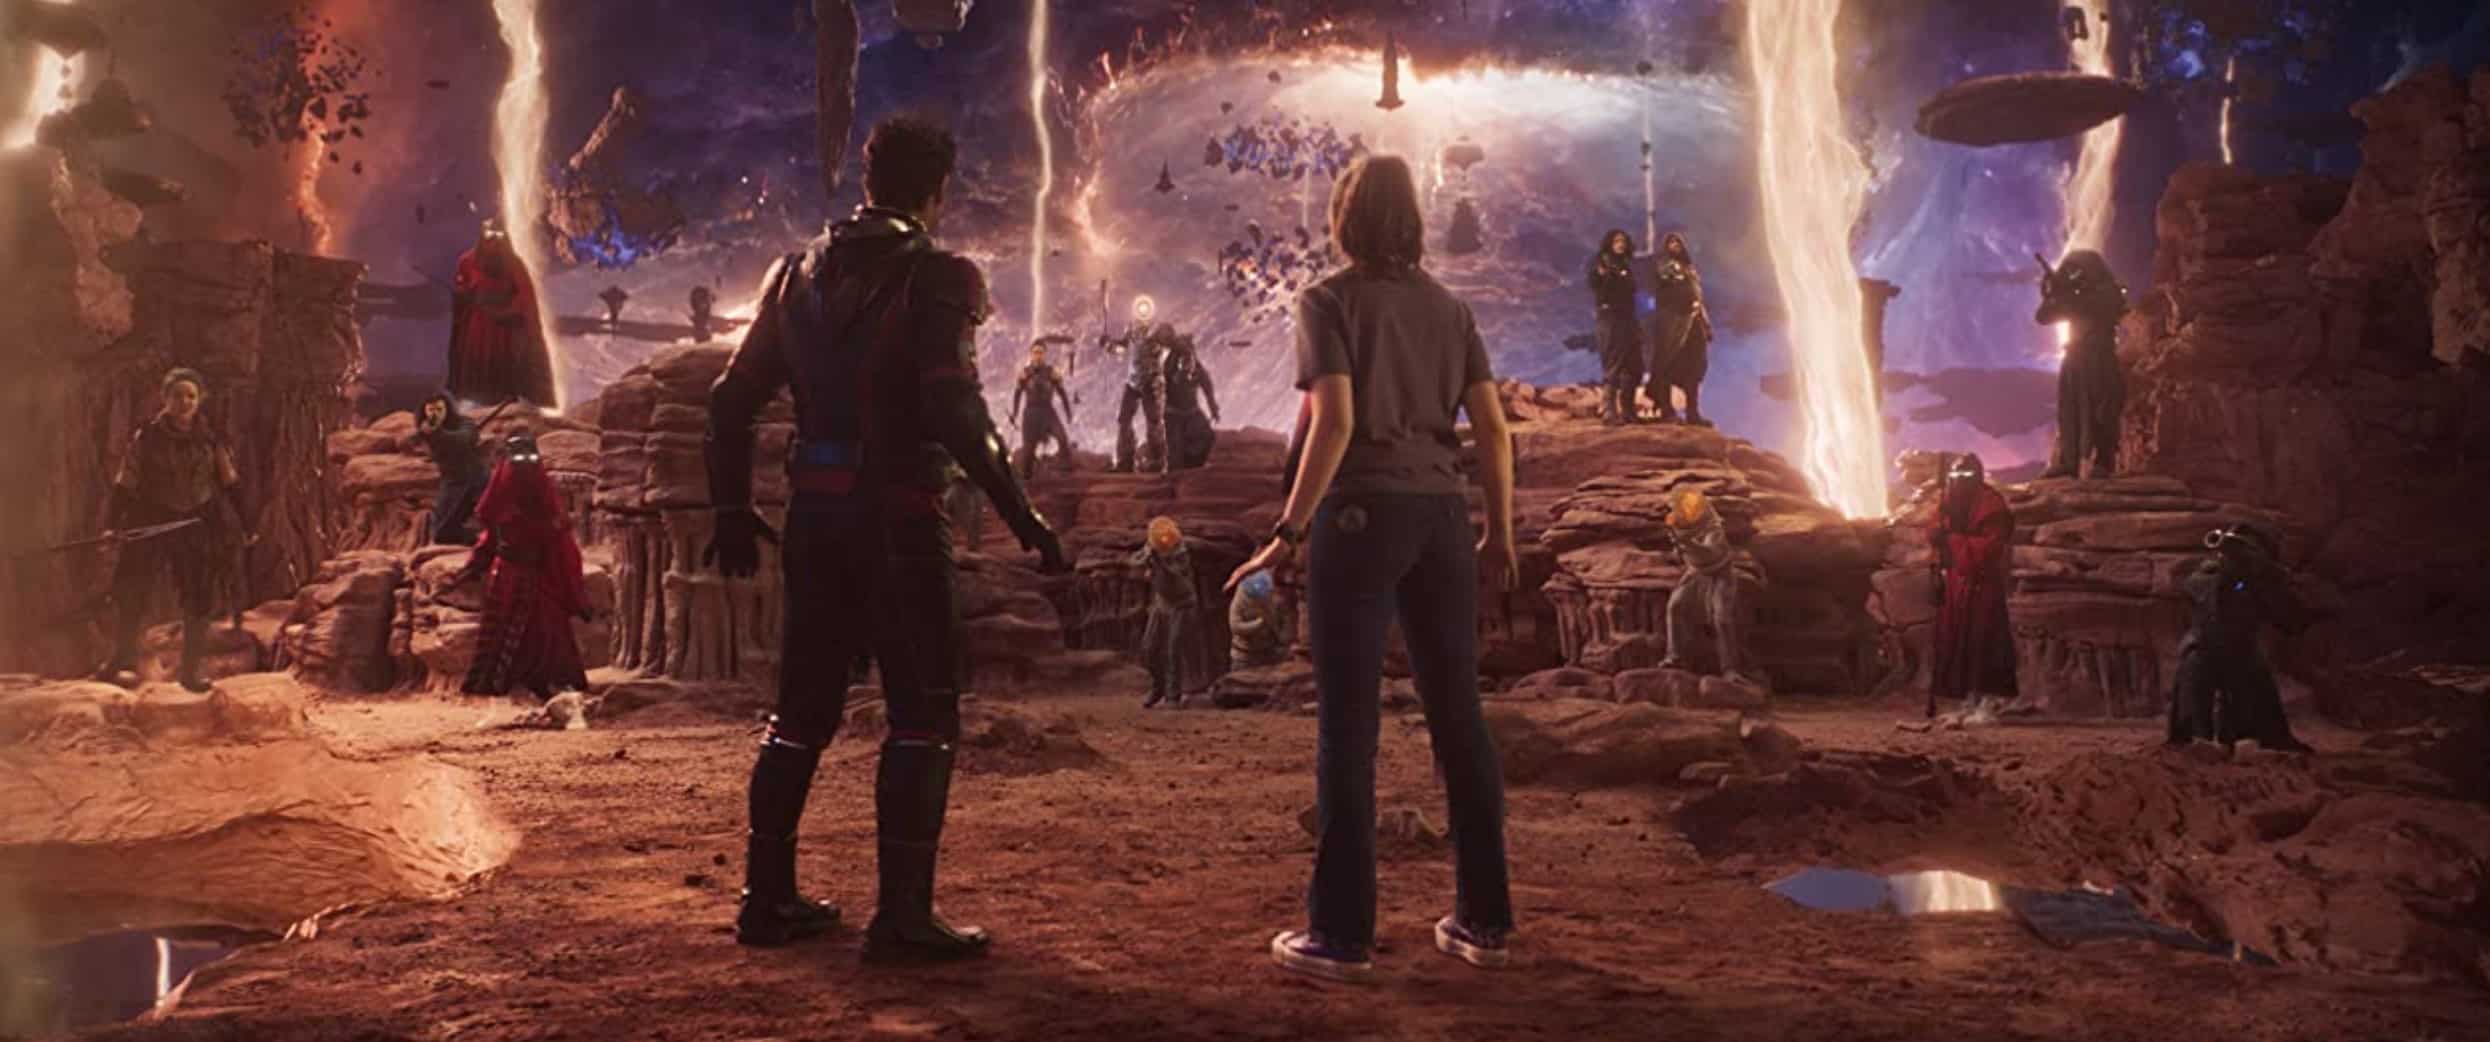 Two people face off with a group in a sci-fi setting in this image from Marvel Studios 